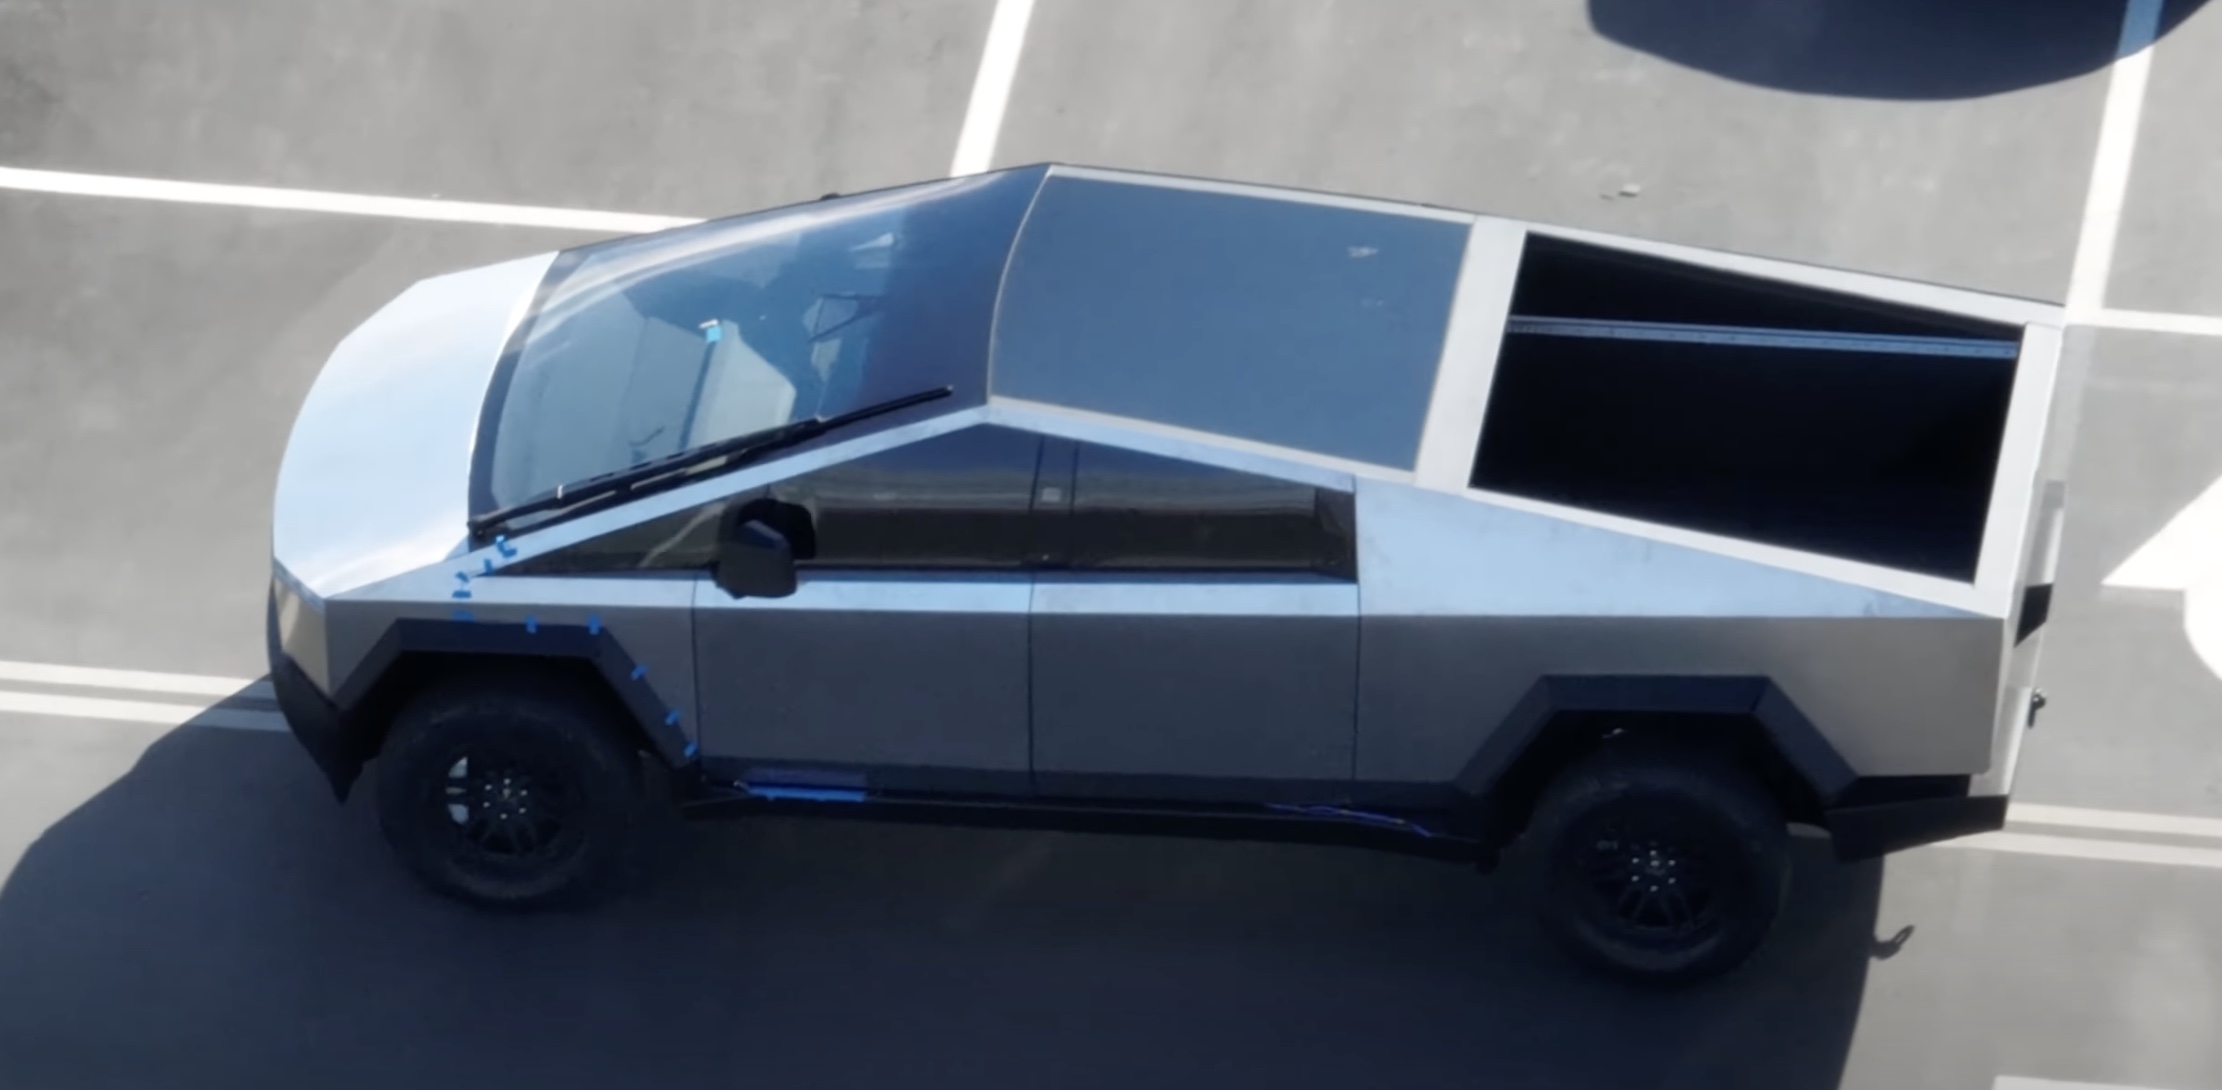 Tesla Cybertruck with updated design spotted on test track